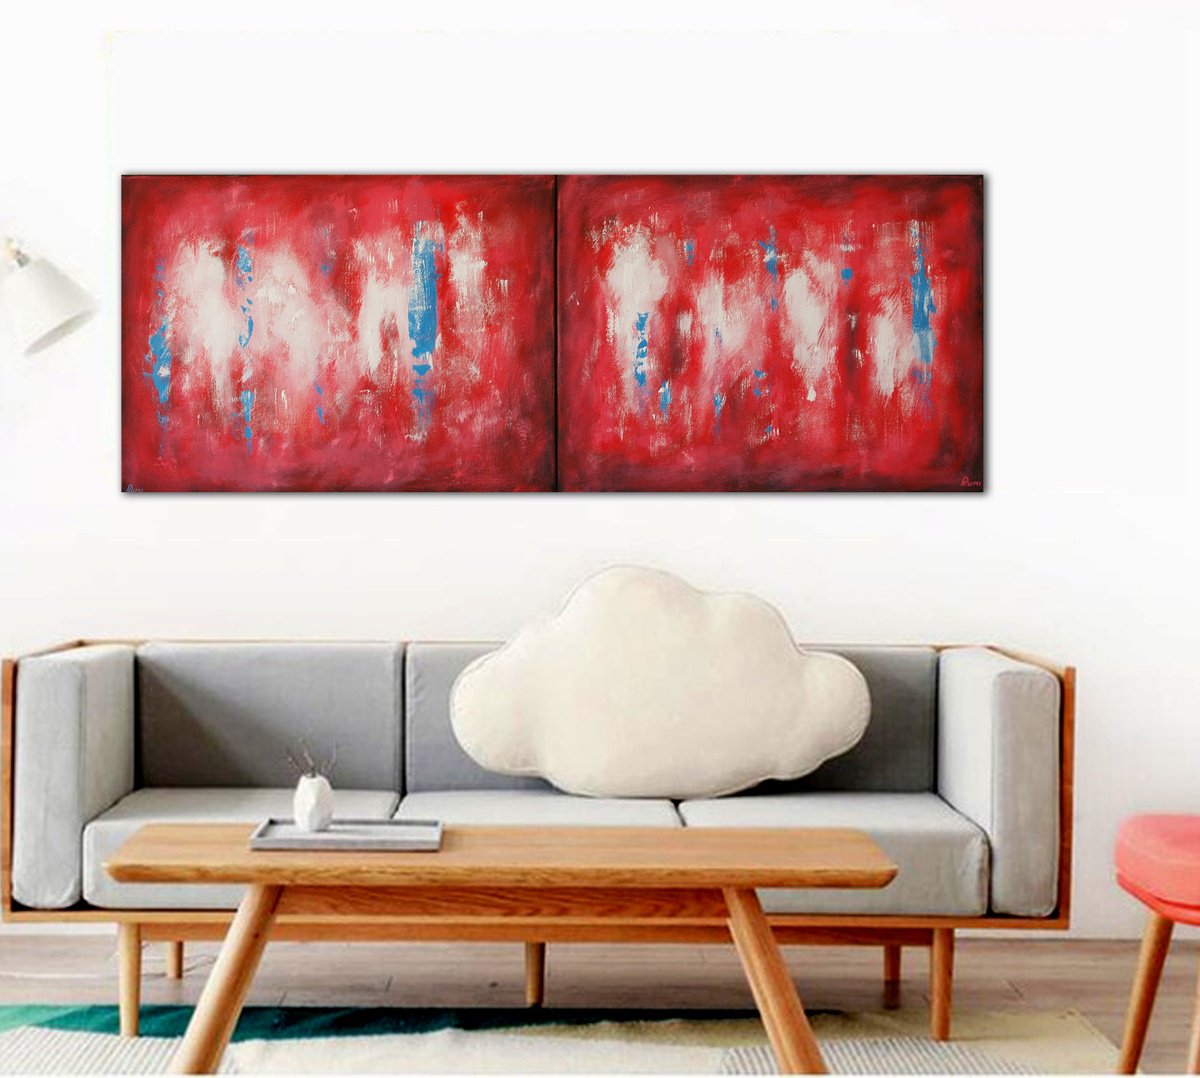 ABSTRACT #068. Large Abstract Painting. Diptych. by Rumen Spasov